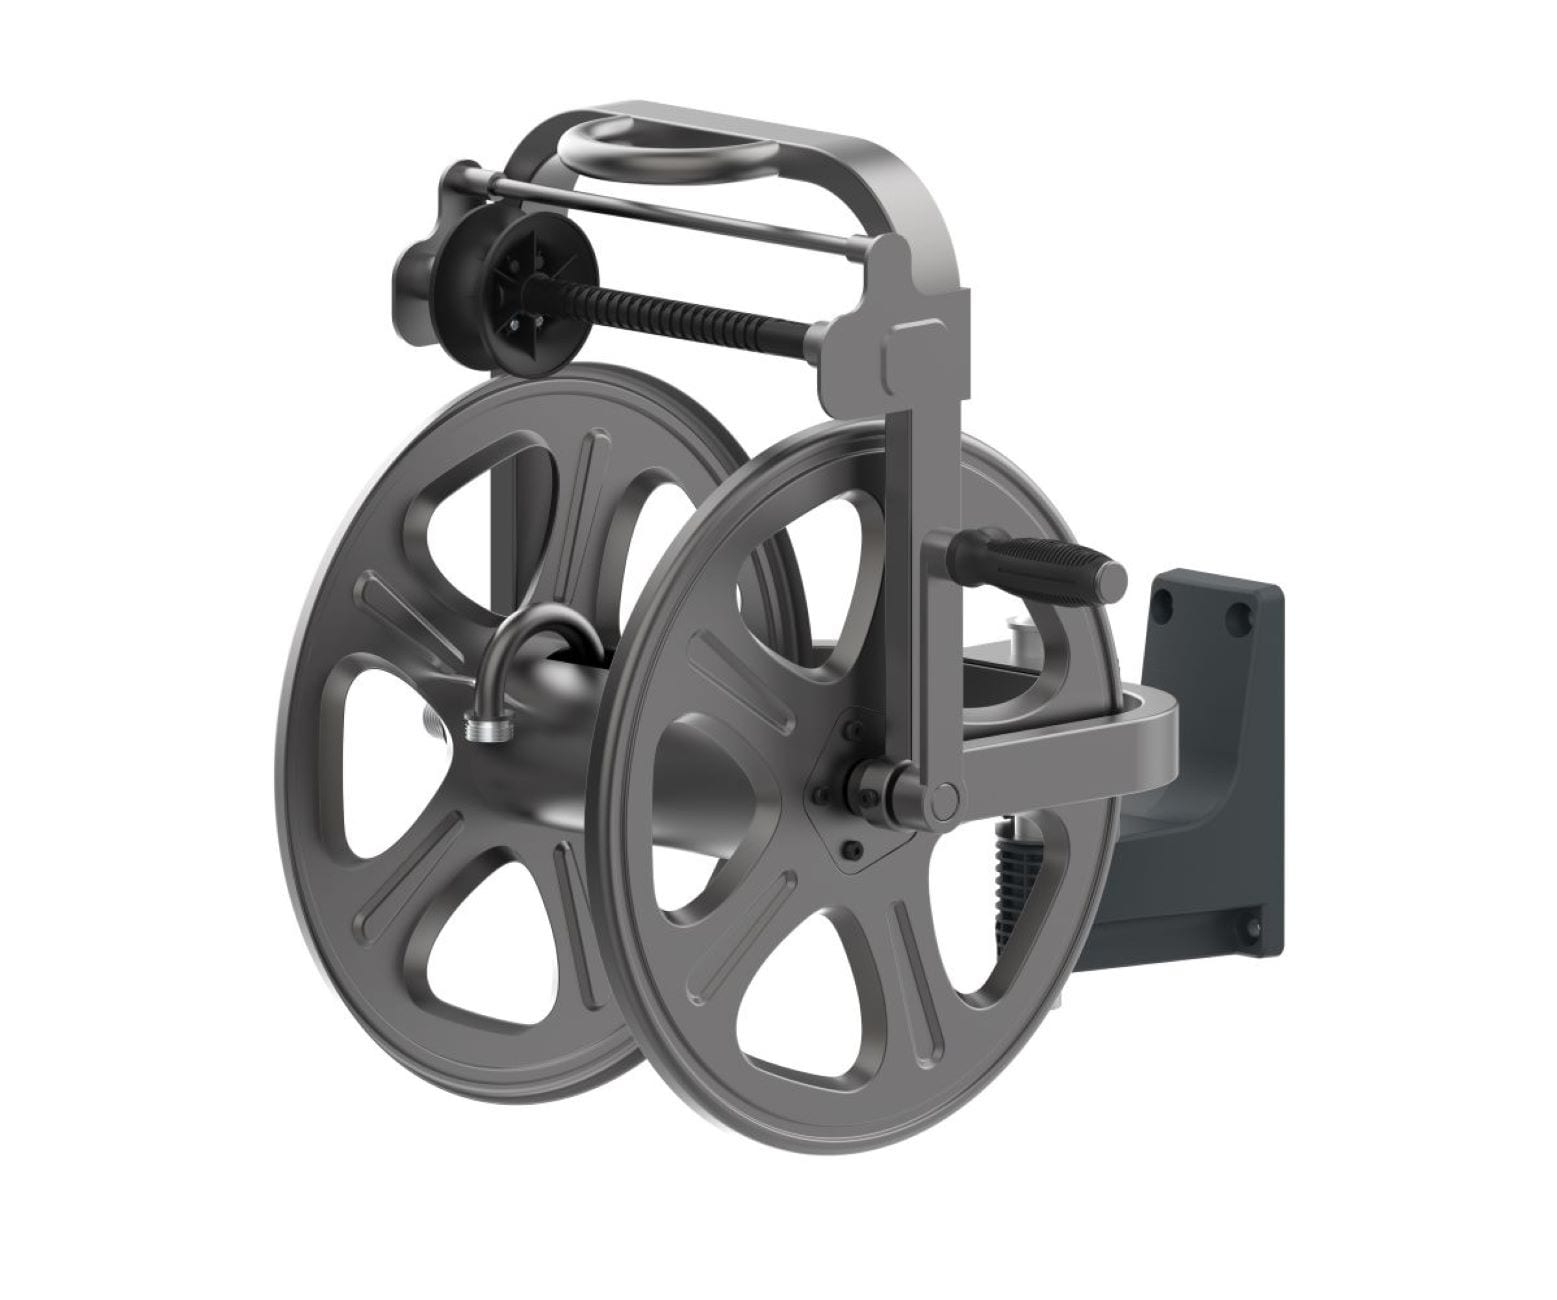 Sunneday The wall mounted hose reel will hold up to 125 ft. of hose, that  will be stored conveniently. Features a hose guide and sturdy crank.  Heavy-gauge material, that will withstand regular